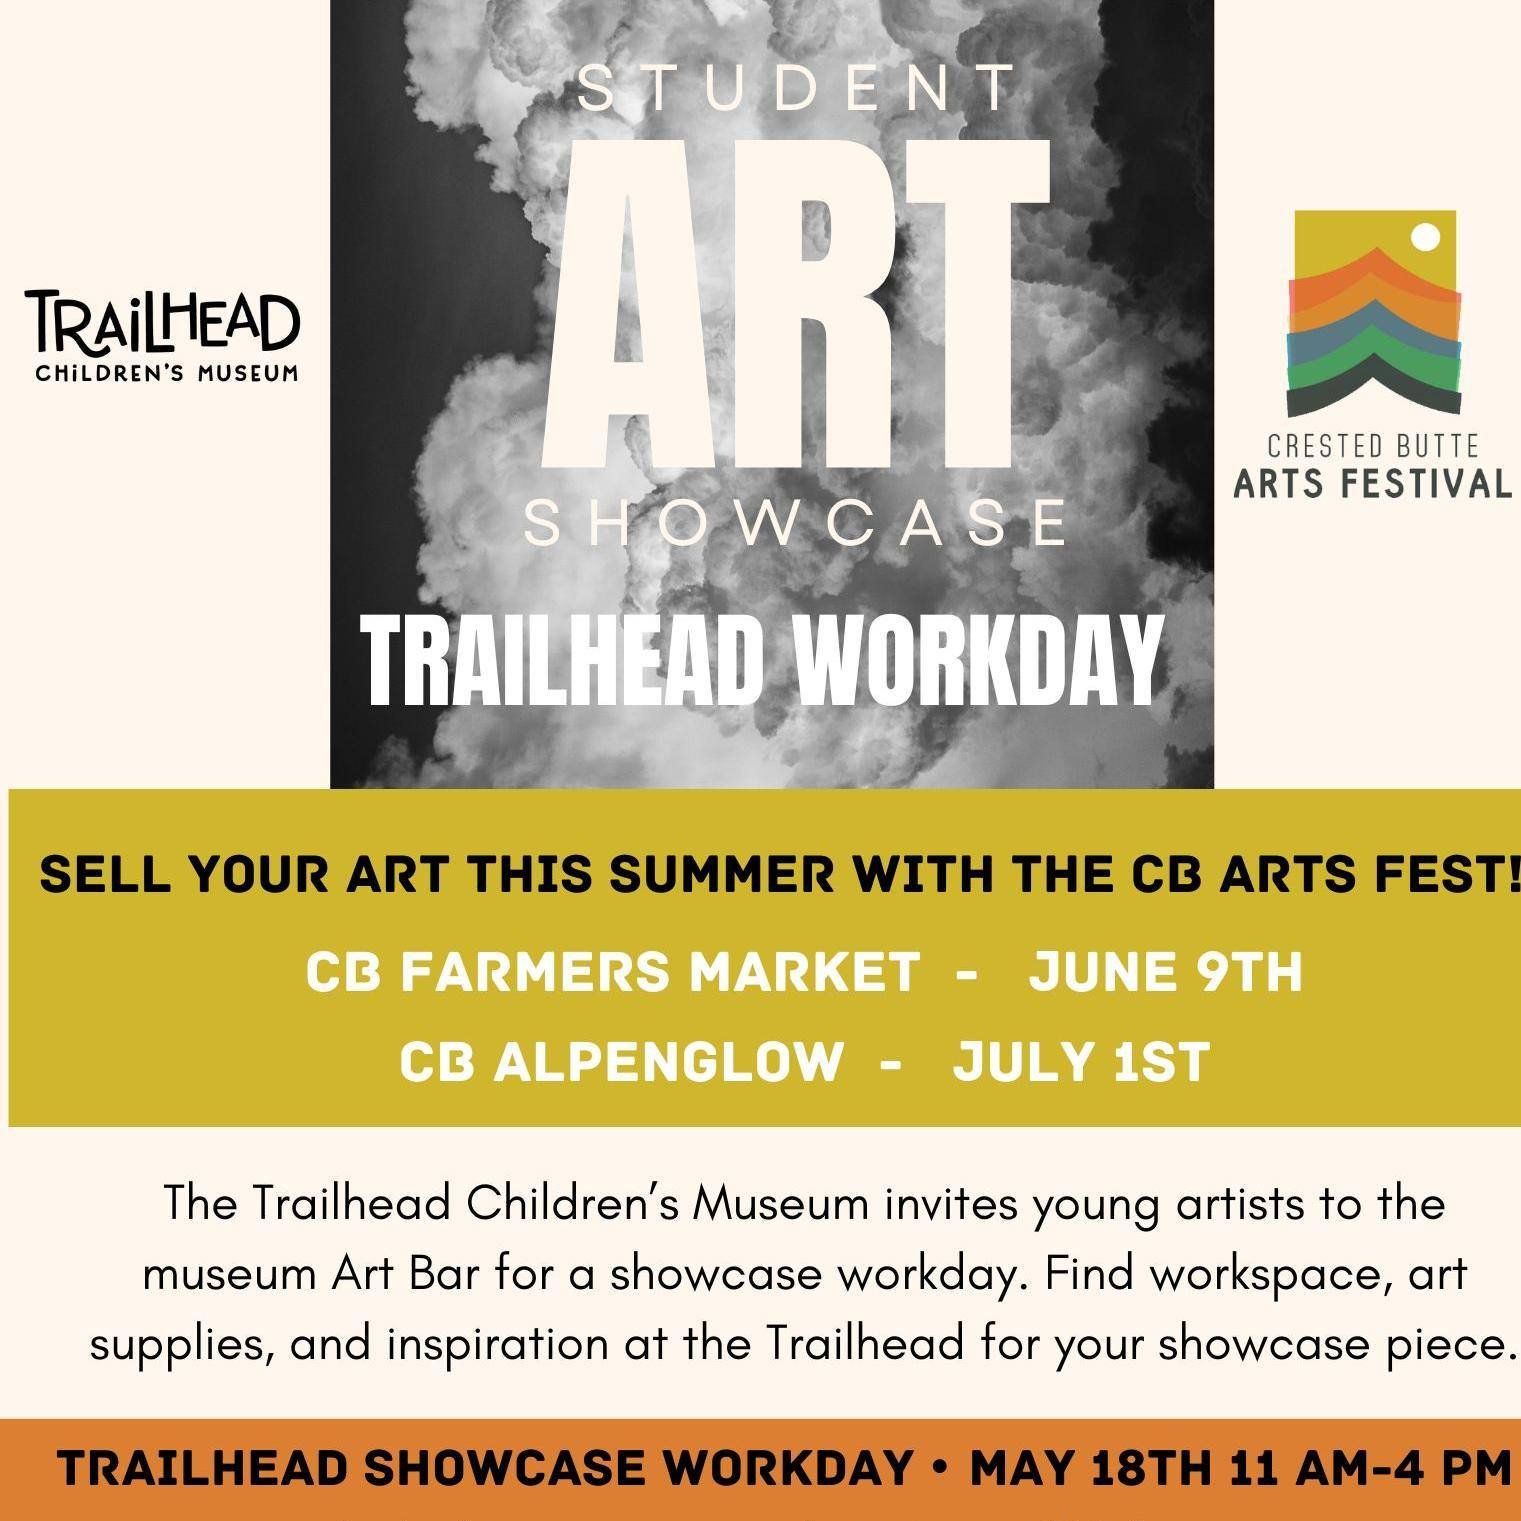 Our friends at @trailhead_childrens_museum are hosting a makers workshop this Saturday to assist students in producing work to place into our Student Art Showcase pop-up events this summer.  More information on how to enter work into the student show